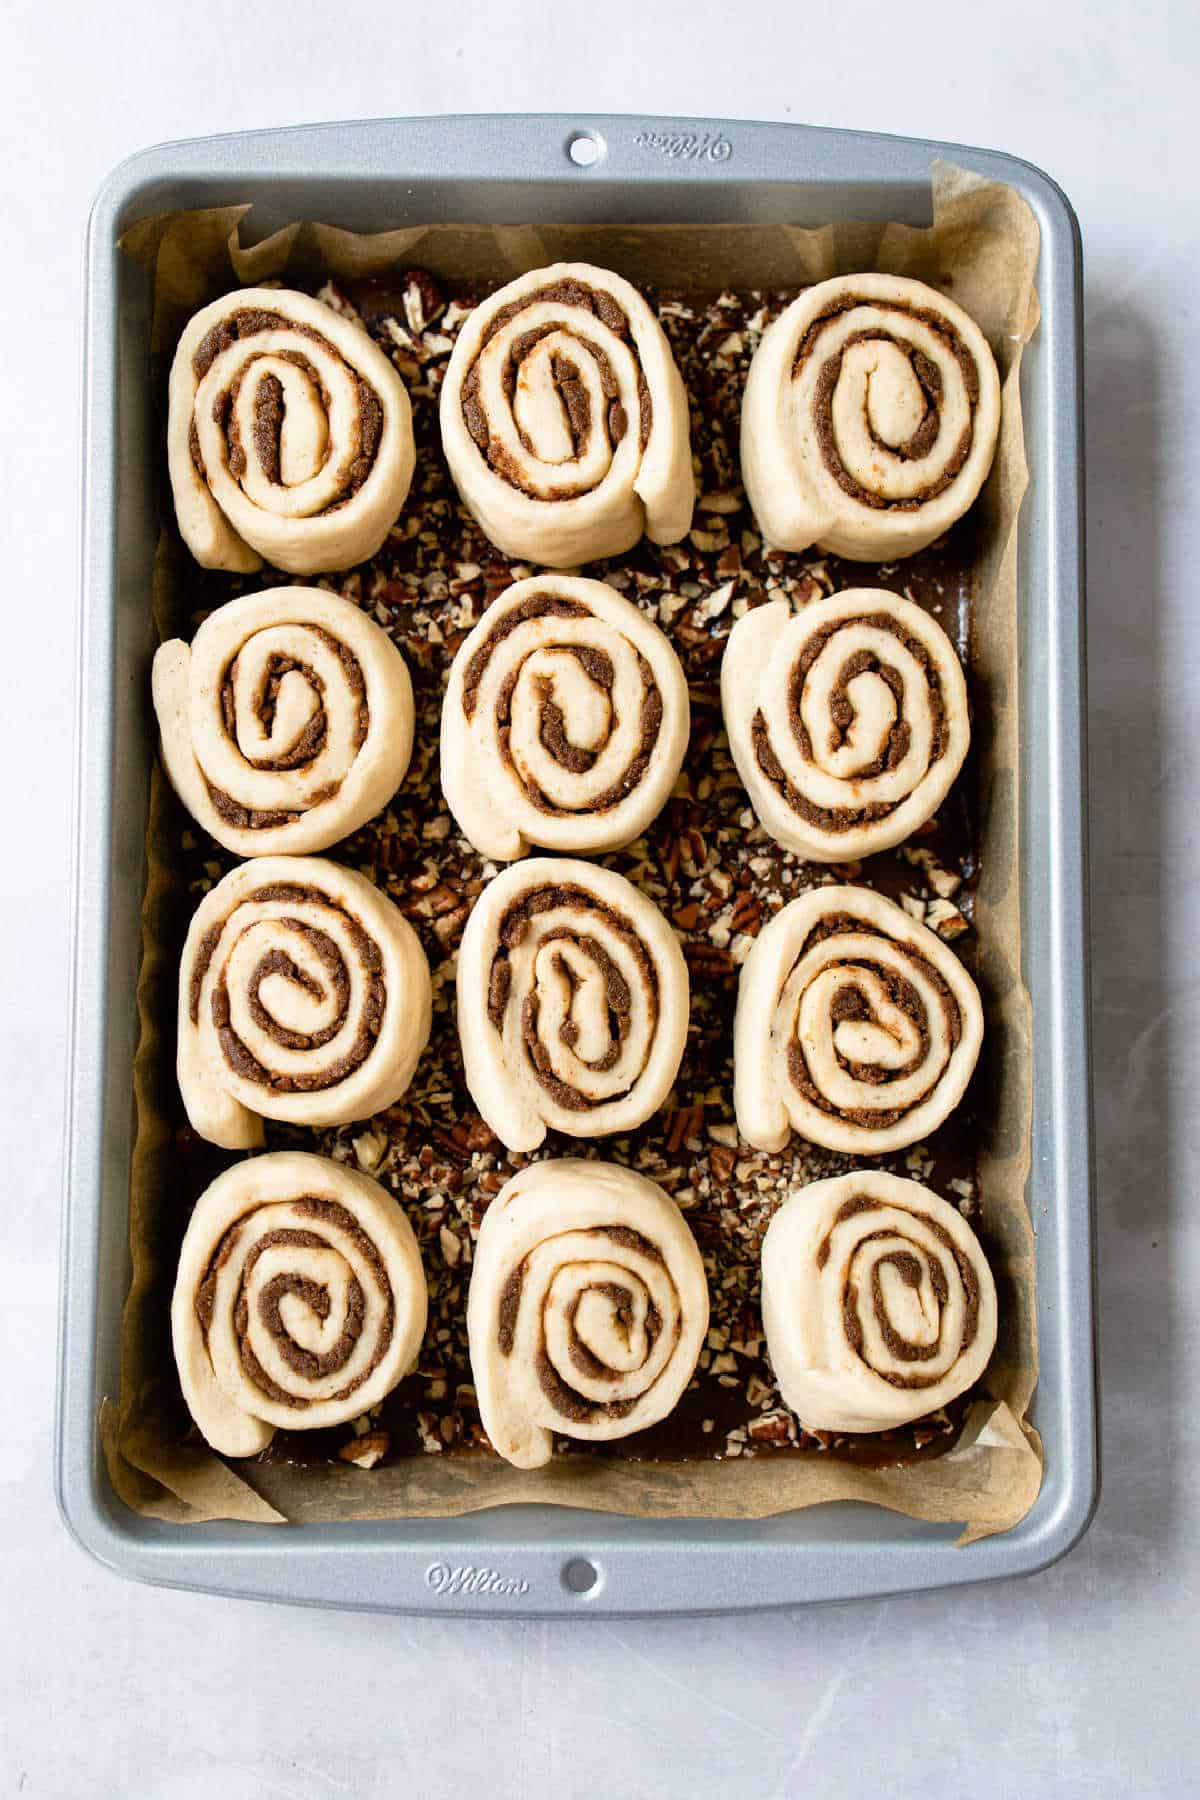 Unbaked caramel rolls in a pan.